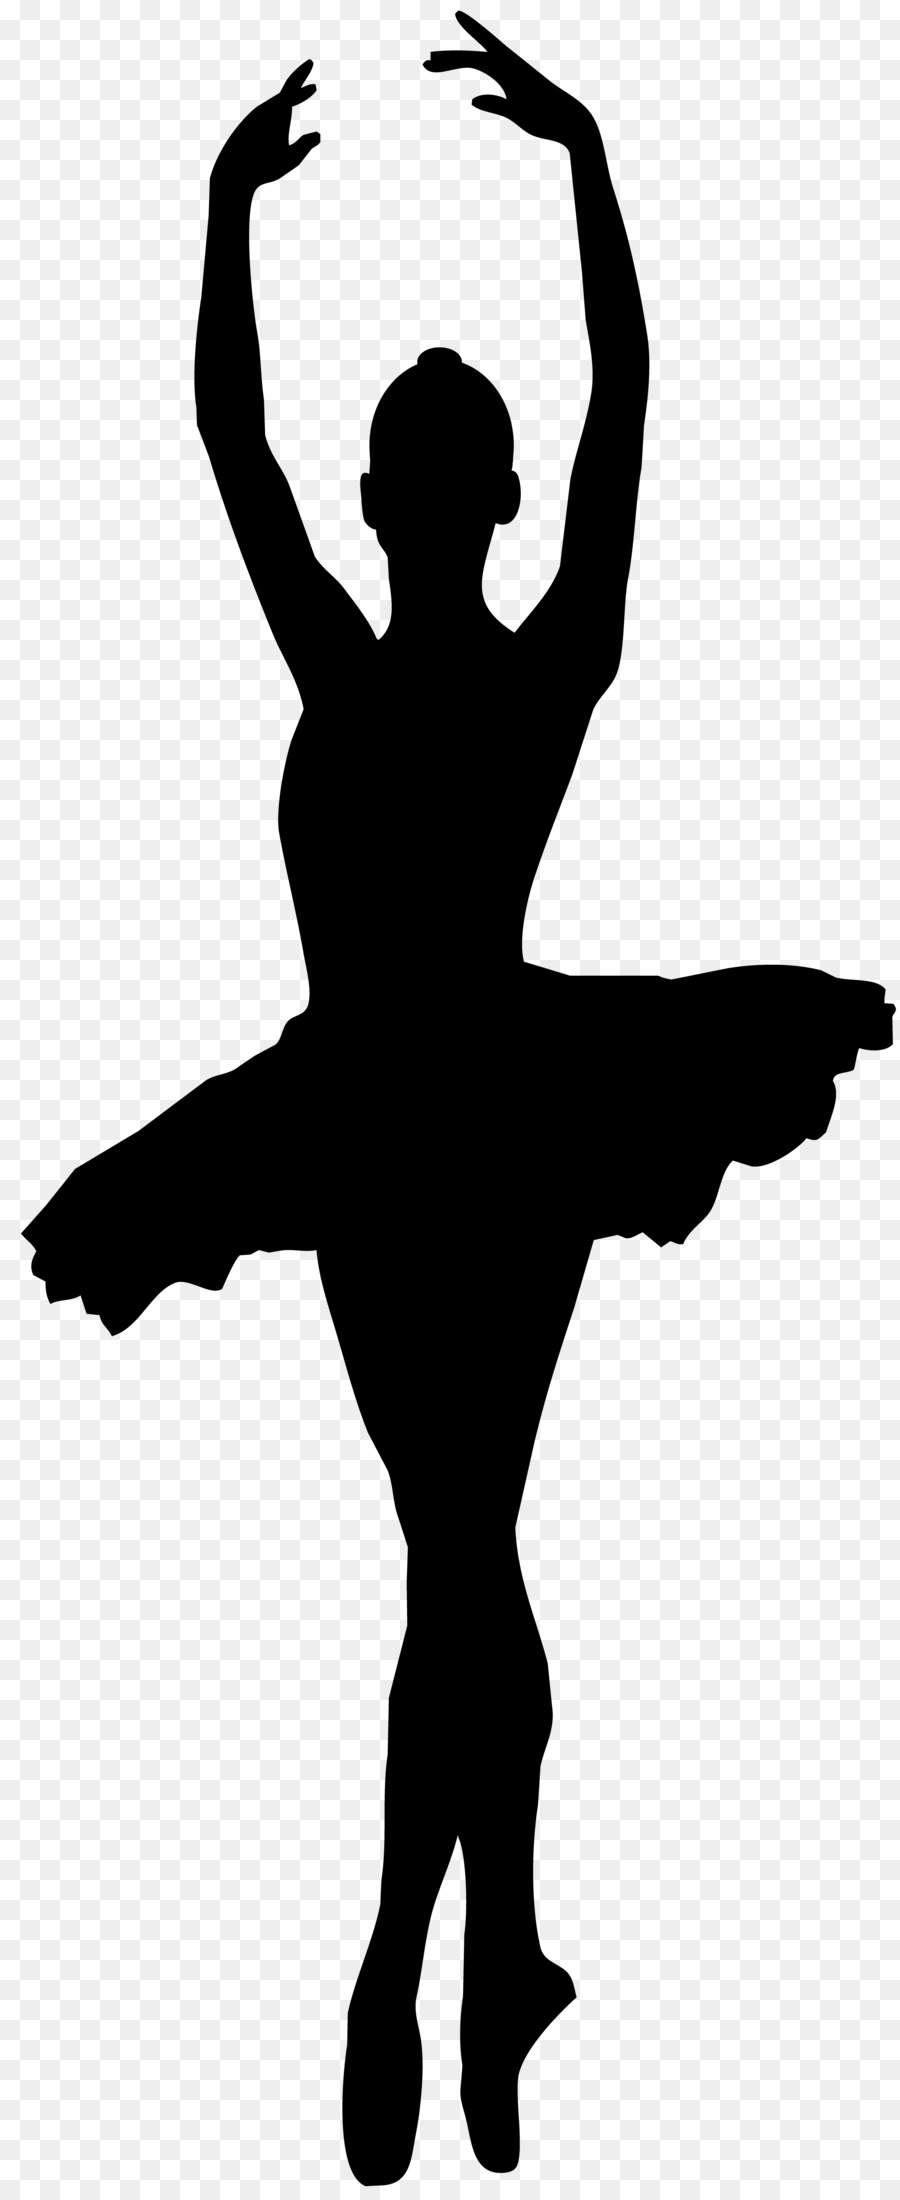 Ballet Dancer Silhouette - Silhouette png download - 2100*3300 - Free